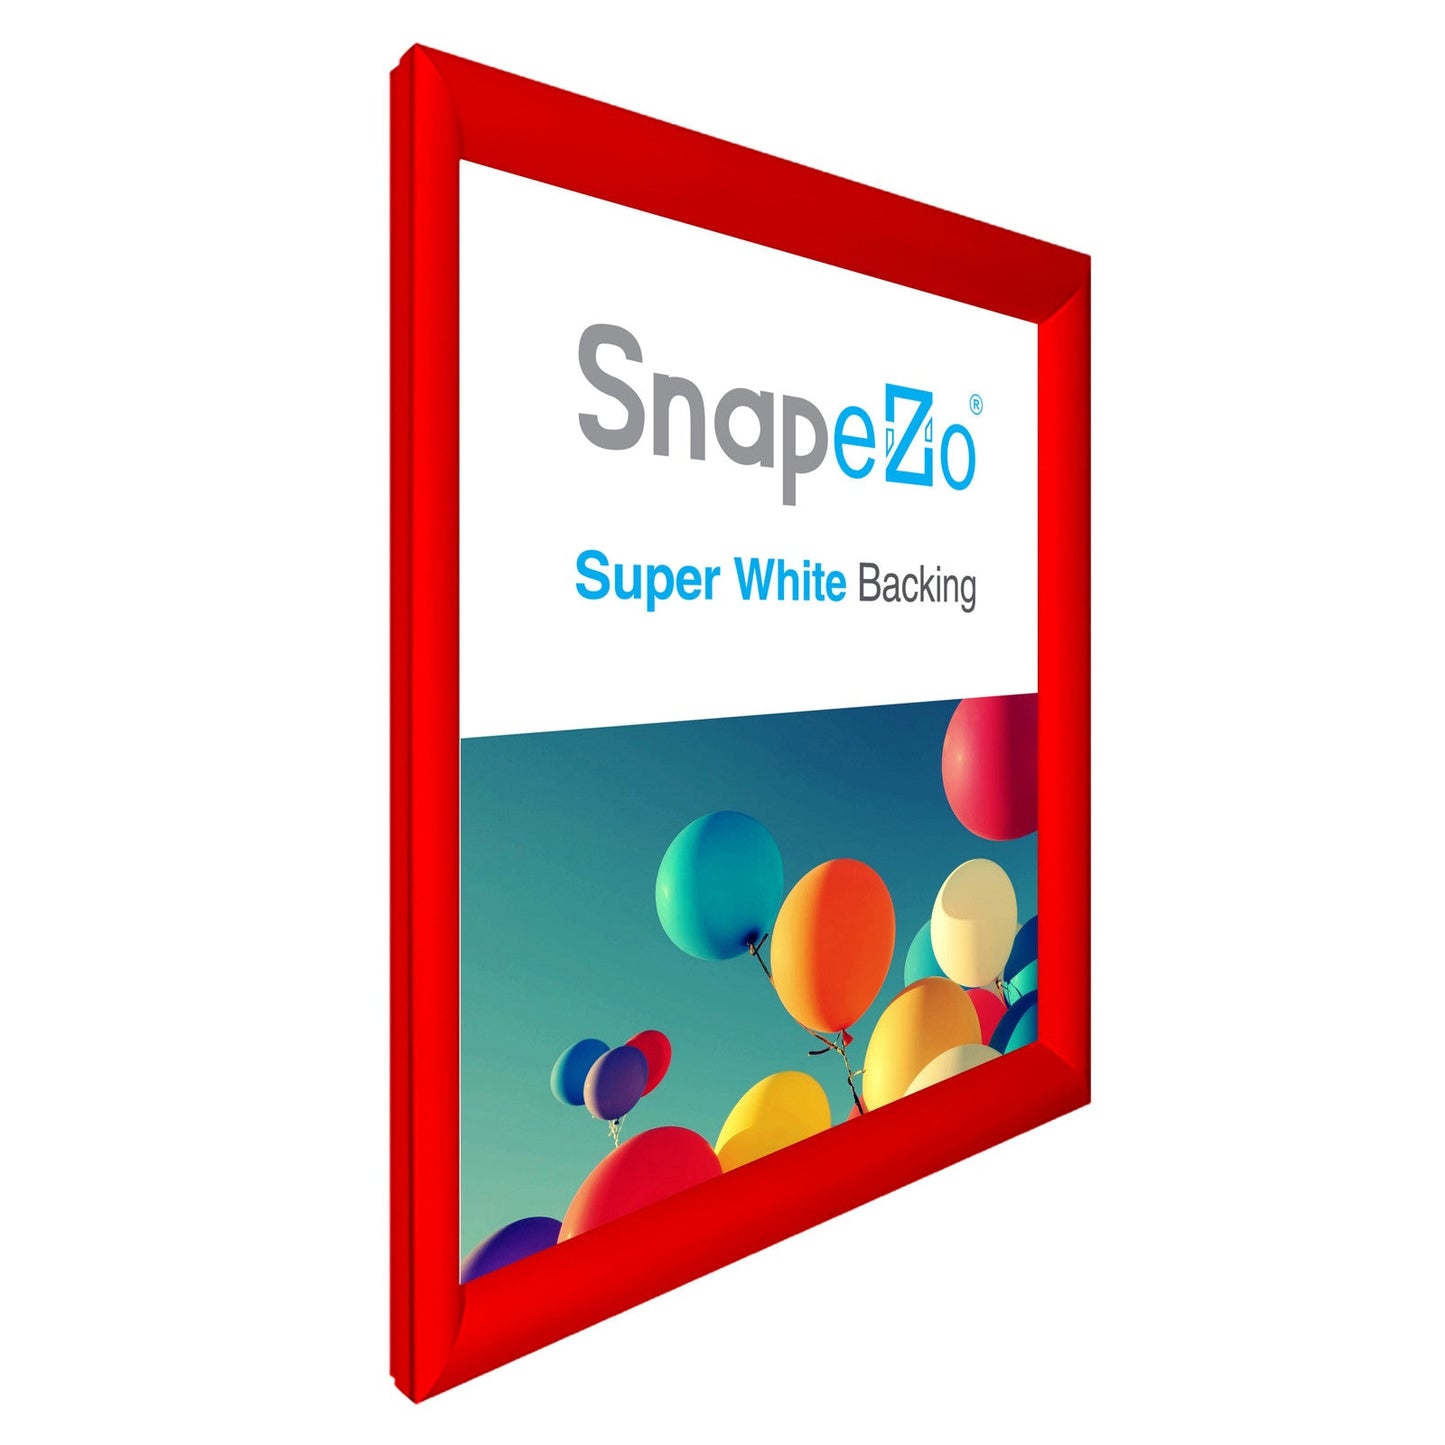 25x30 Red SnapeZo® Snap Frame - 1.2" Profile